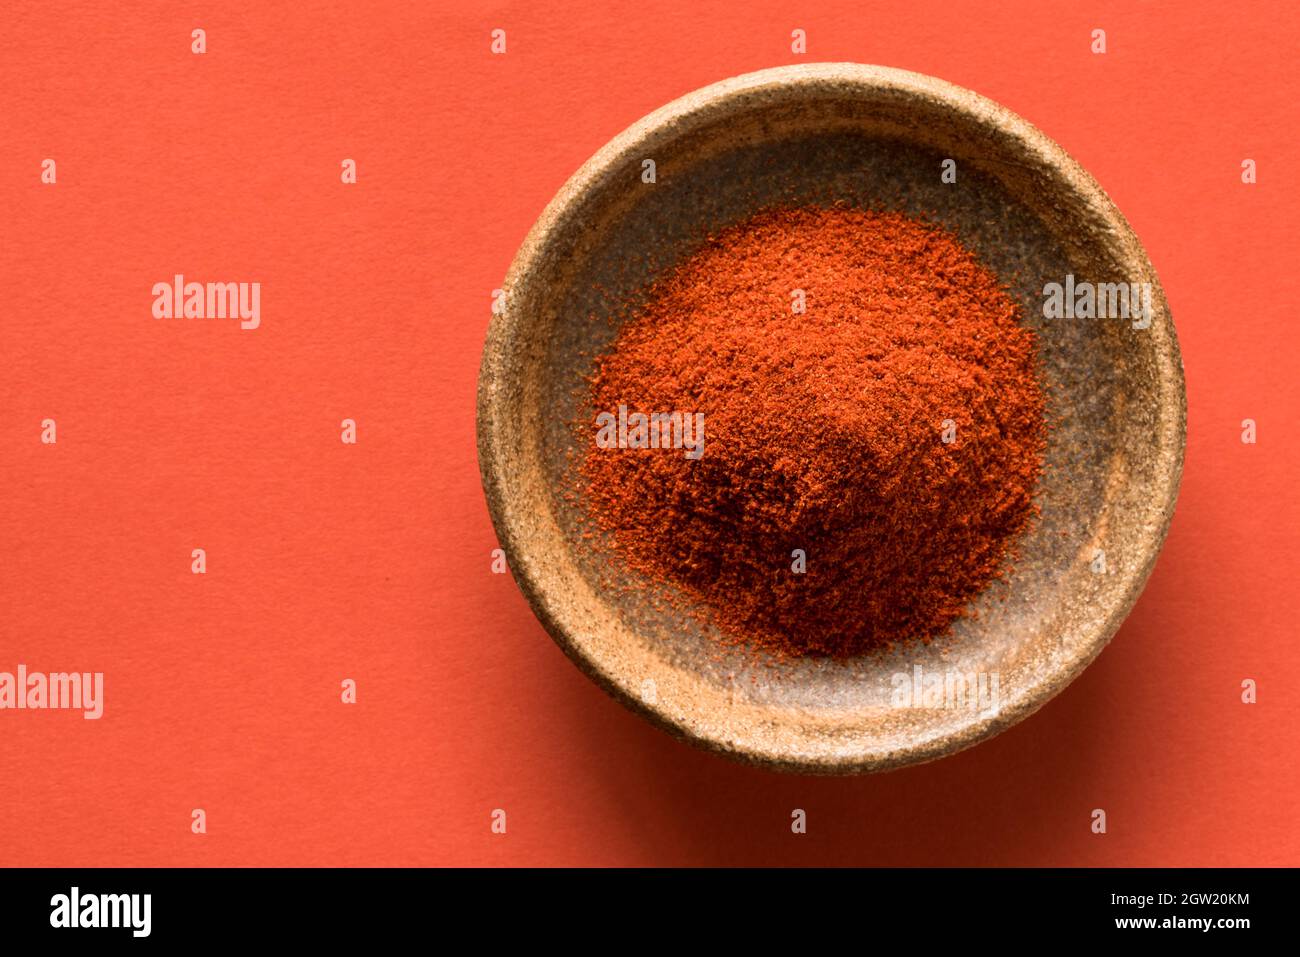 Ground Cayenne Pepper In A Bowl Stock Photo